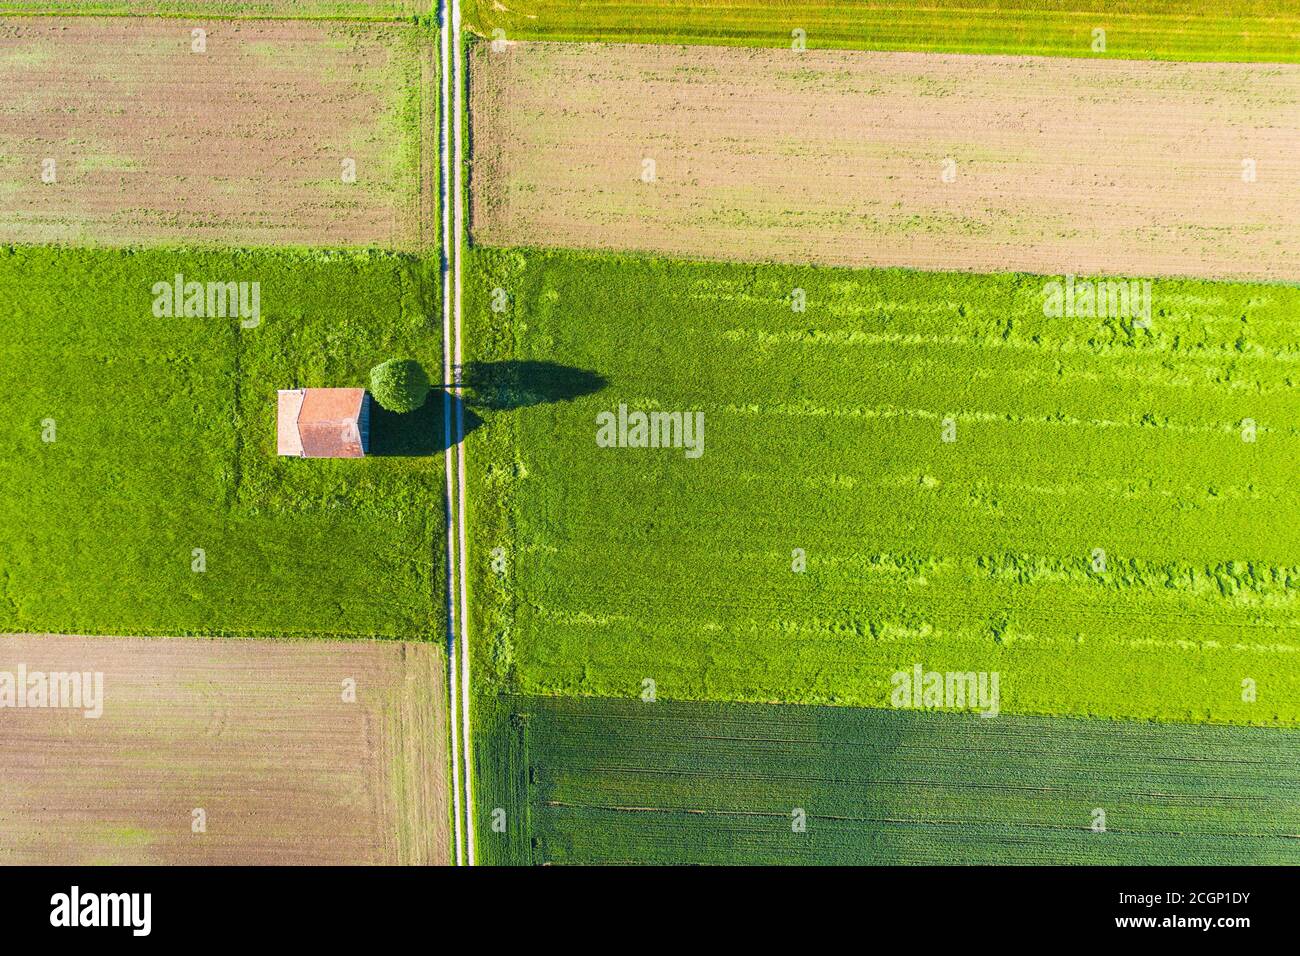 Field path through cultural landscape from above, near Huglfing, Pfaffenwinkel, drone picture, Upper Bavaria, Bavaria, Germany Stock Photo